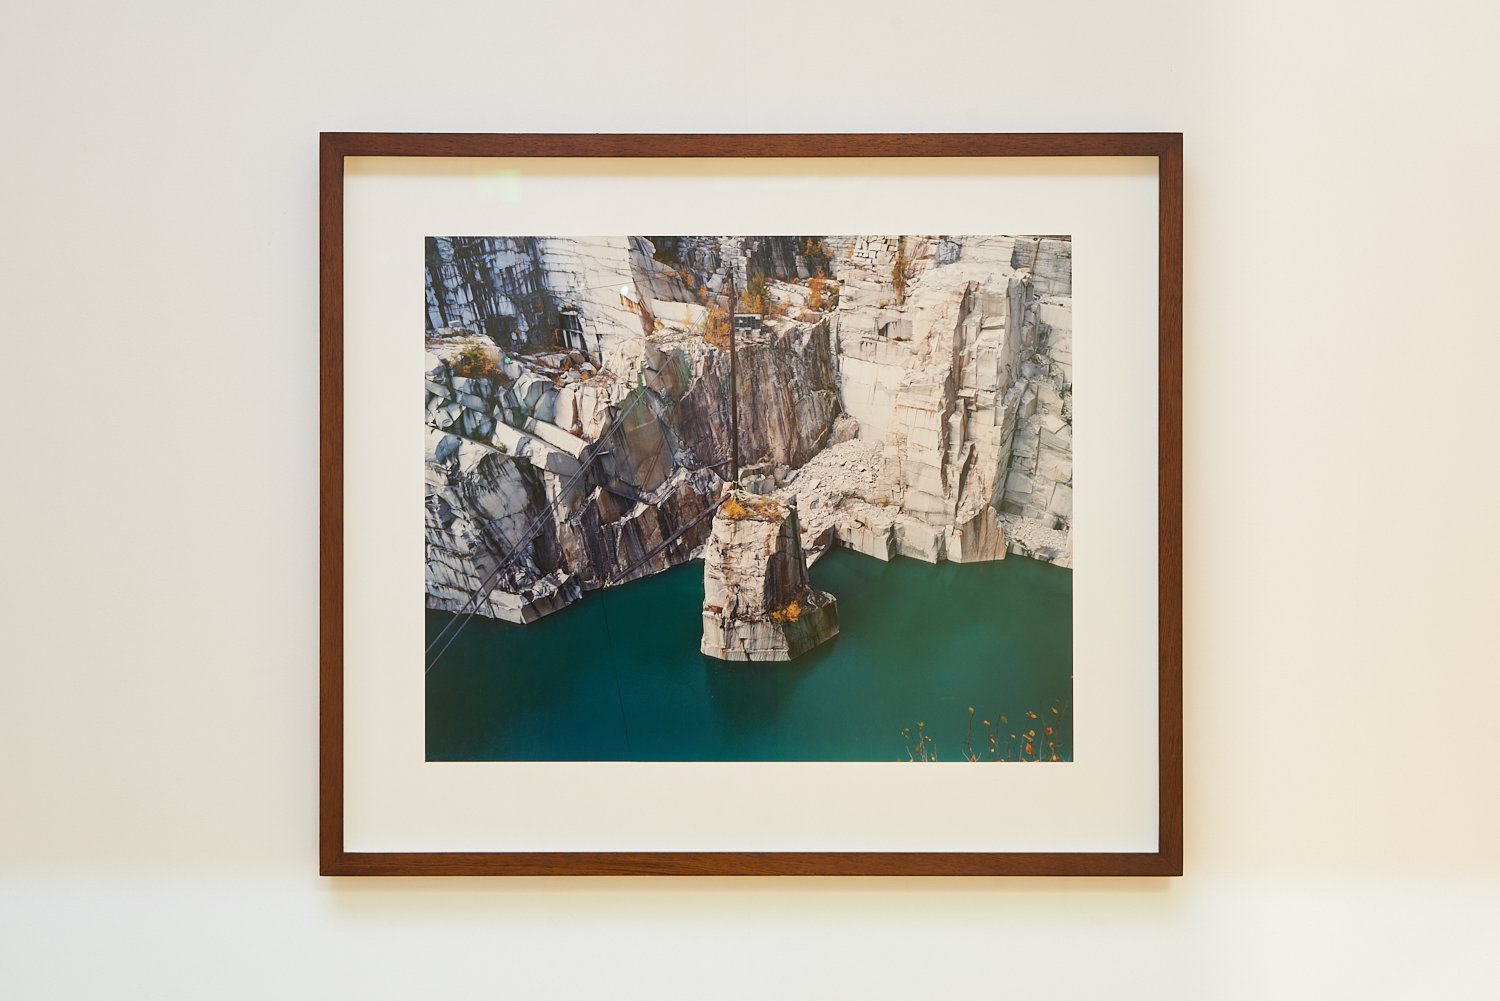  ‘Rock of Ages #8, Abandoned Section, Wells-Lamsen Quarry, Barre, Vermont’ 1991 by Edward Burtynsky (currently shown at GIANT Gallery, on loan from Flowers Gallery). ©️ Edward Burtynsky. All rights reserved. Exhibition photography by Ed Hill for GIAN